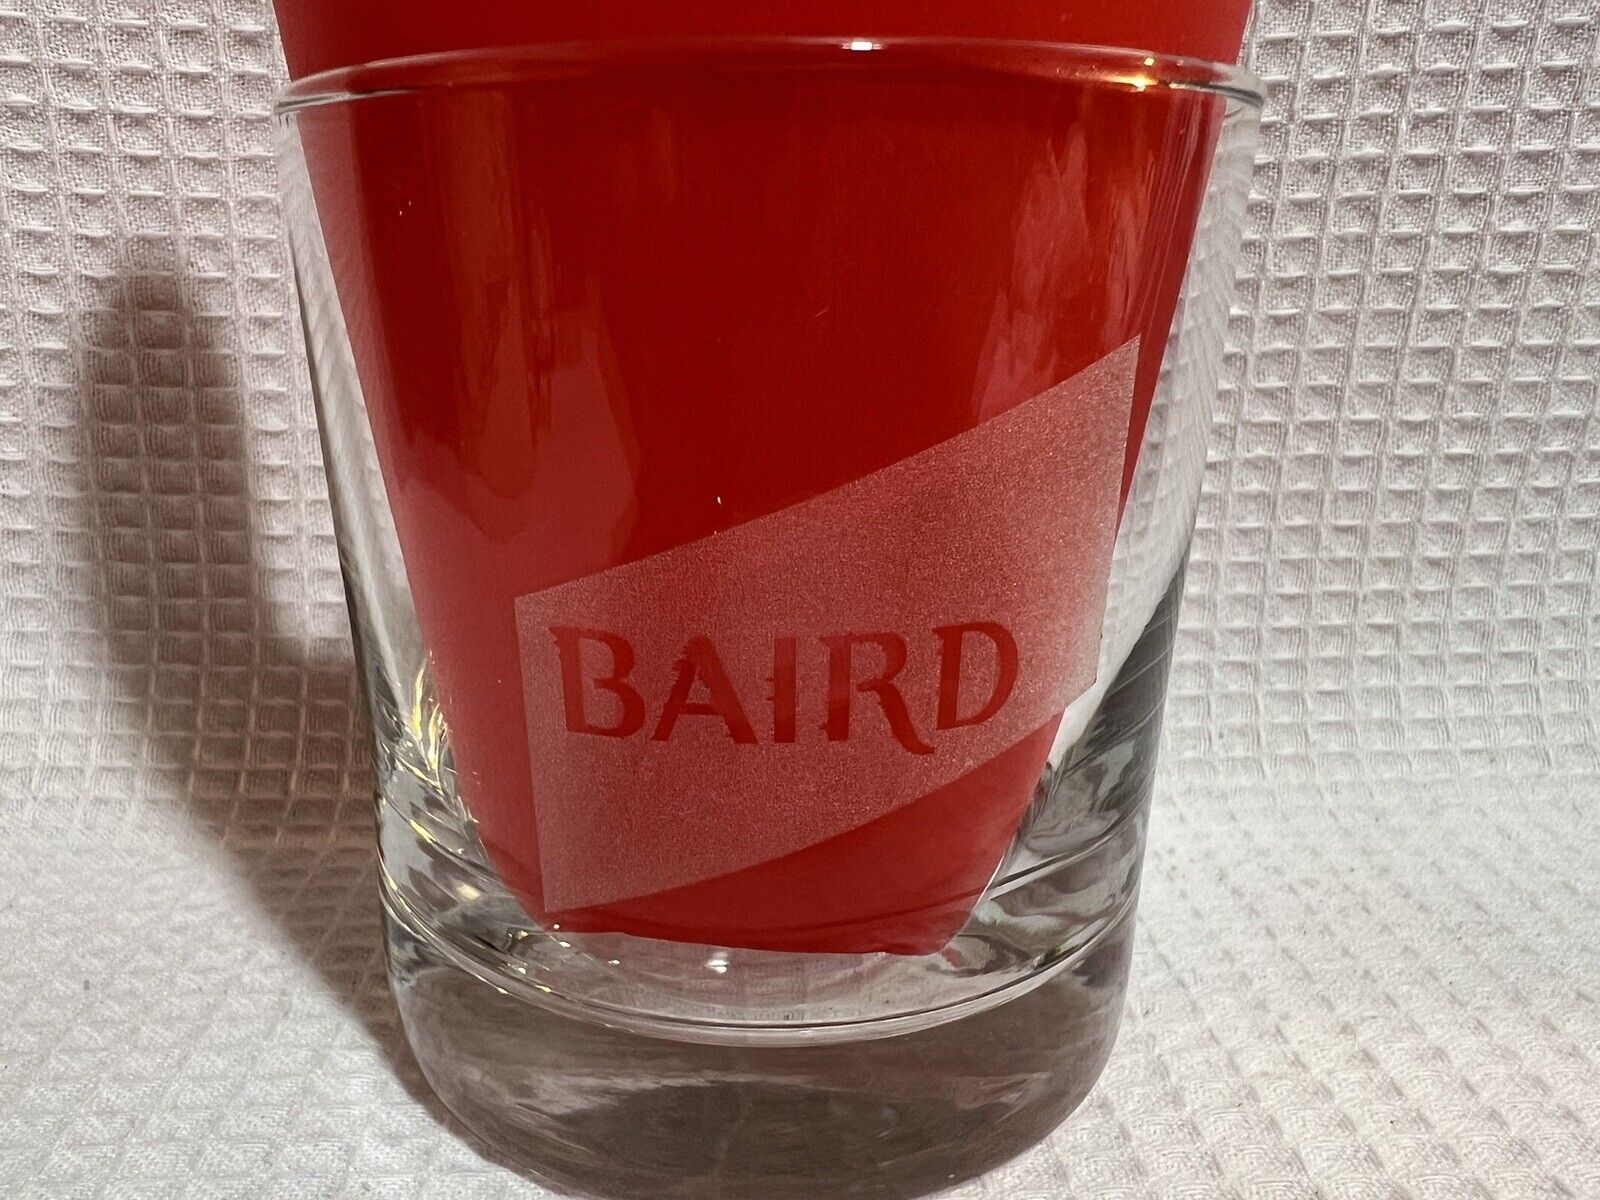 “BAIRD” Investment Banking-Clear Glass/Frosted Logo-Advertising Col. Tumbler